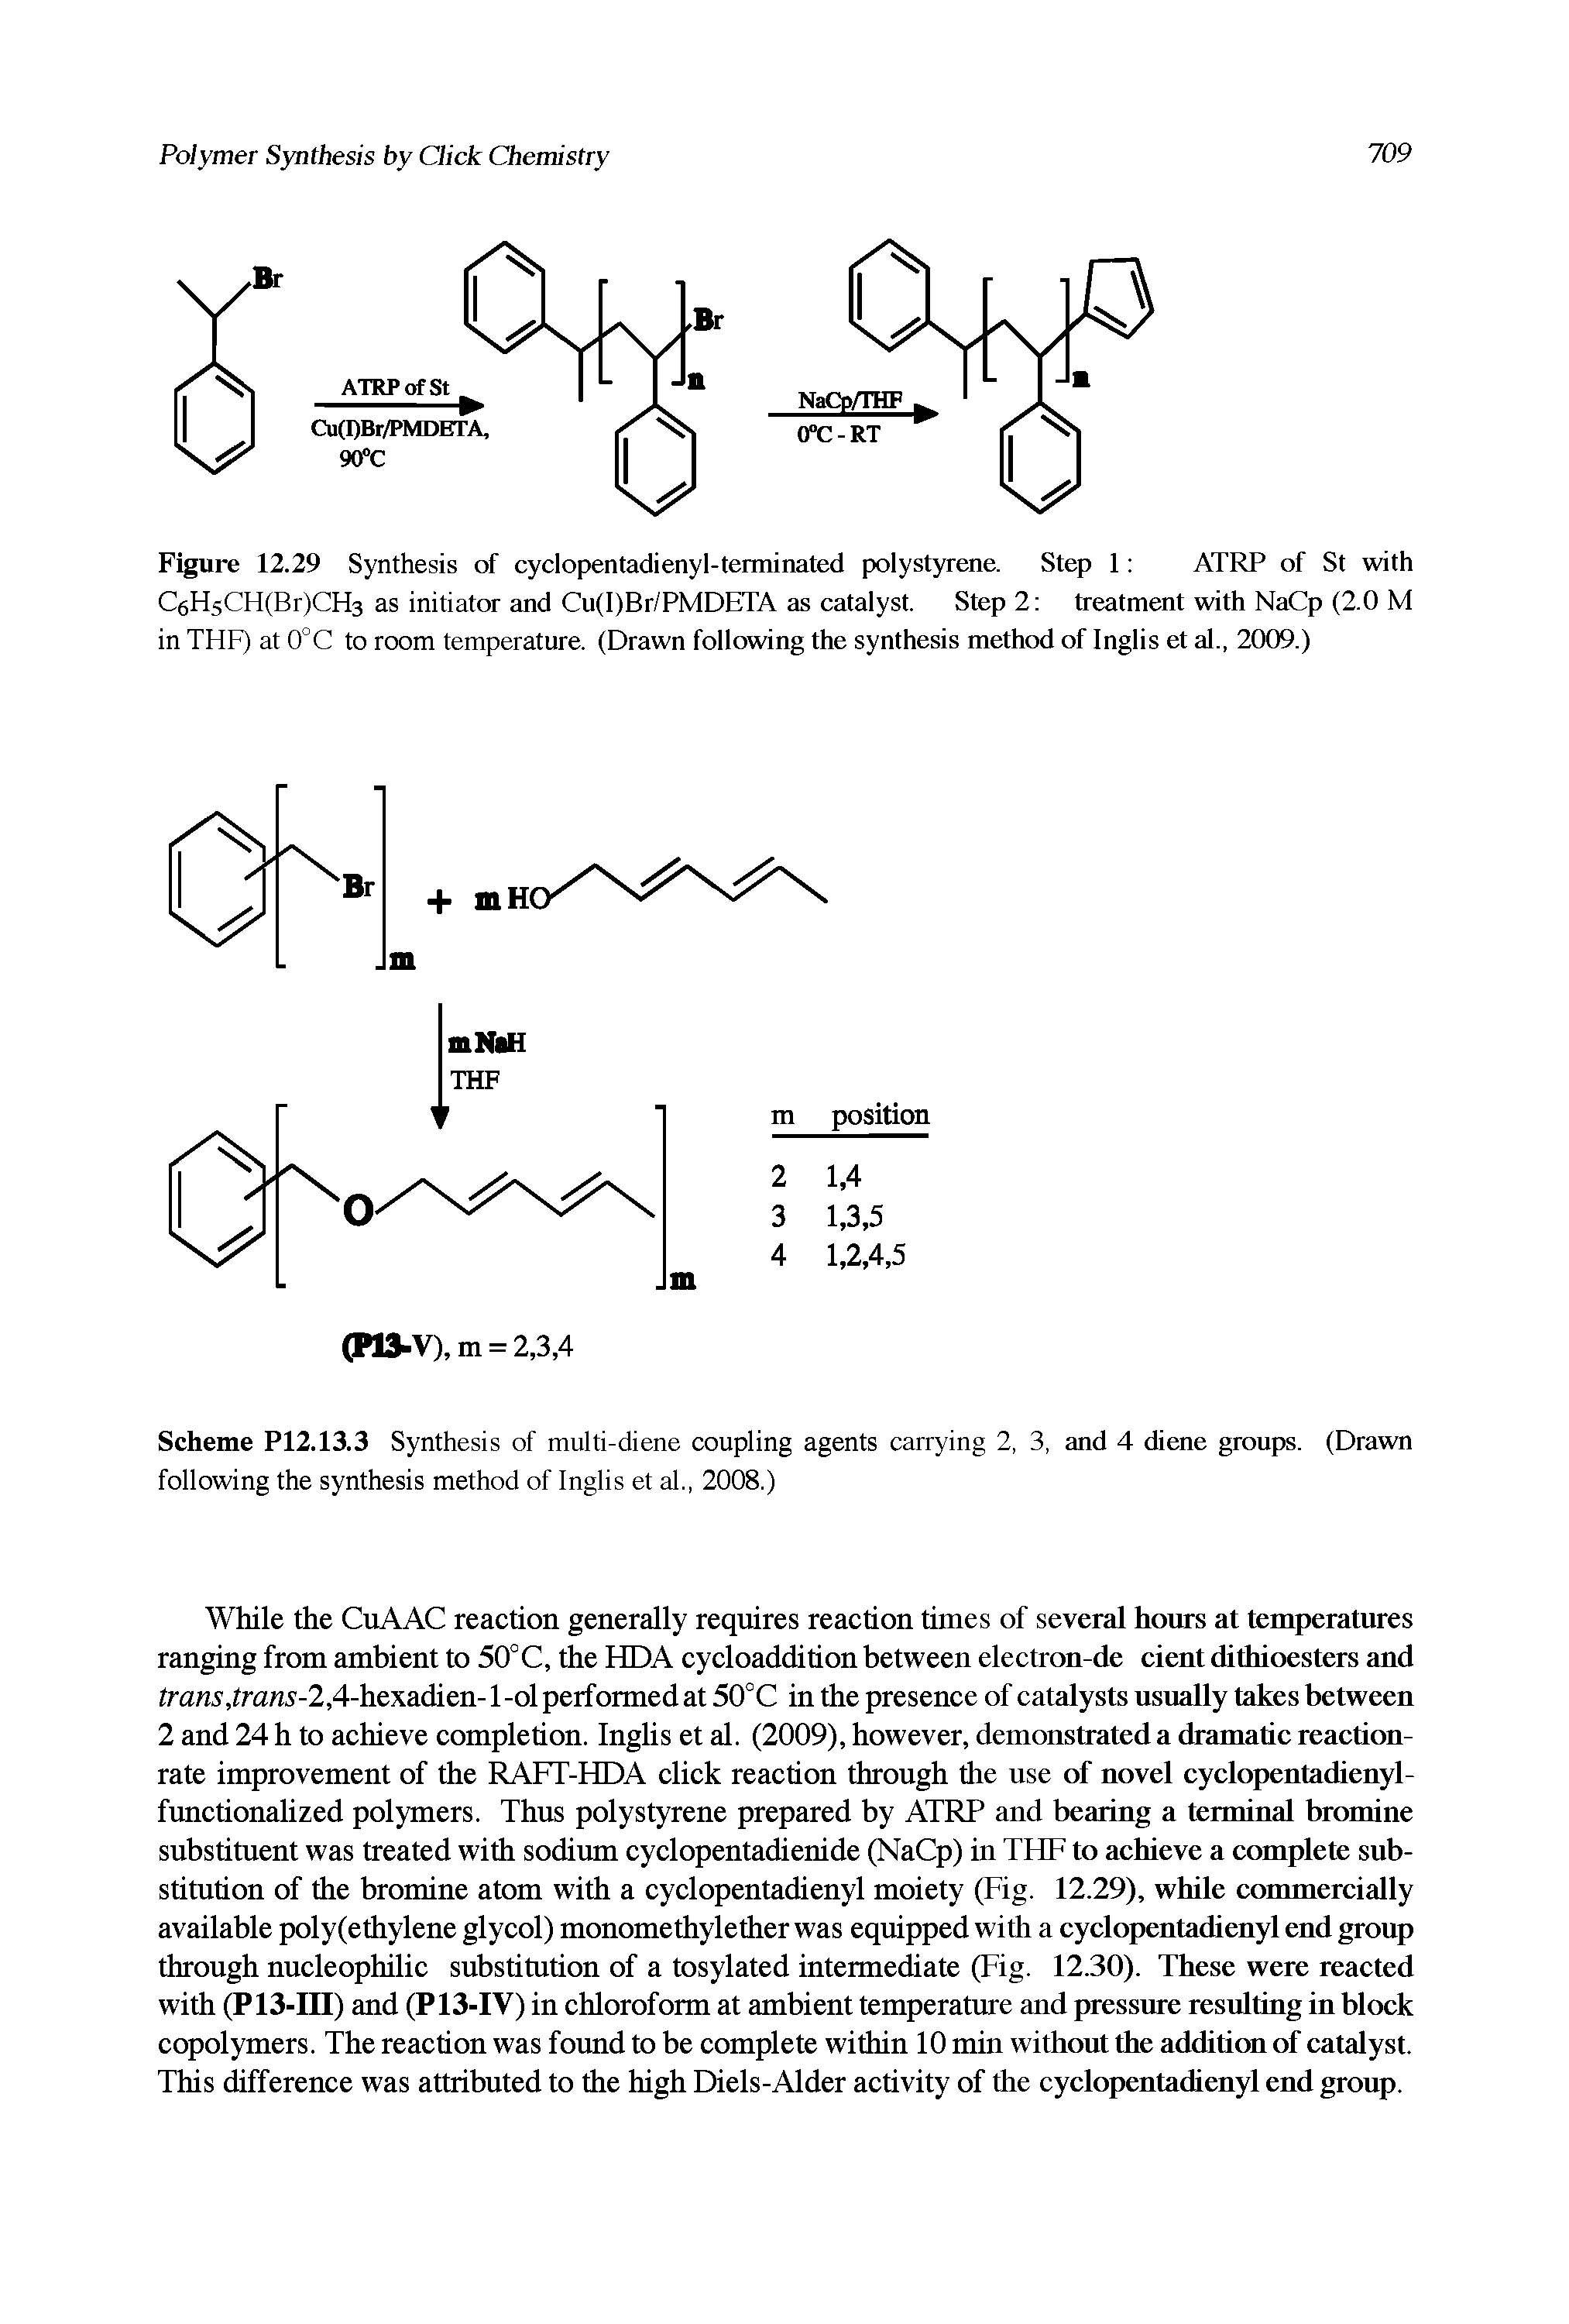 Scheme P12.13.3 Synthesis of multi-diene coupling agents carrying 2, 3, and 4 diene groups. (Drawn following the synthesis method of Inglis et al., 2008.)...